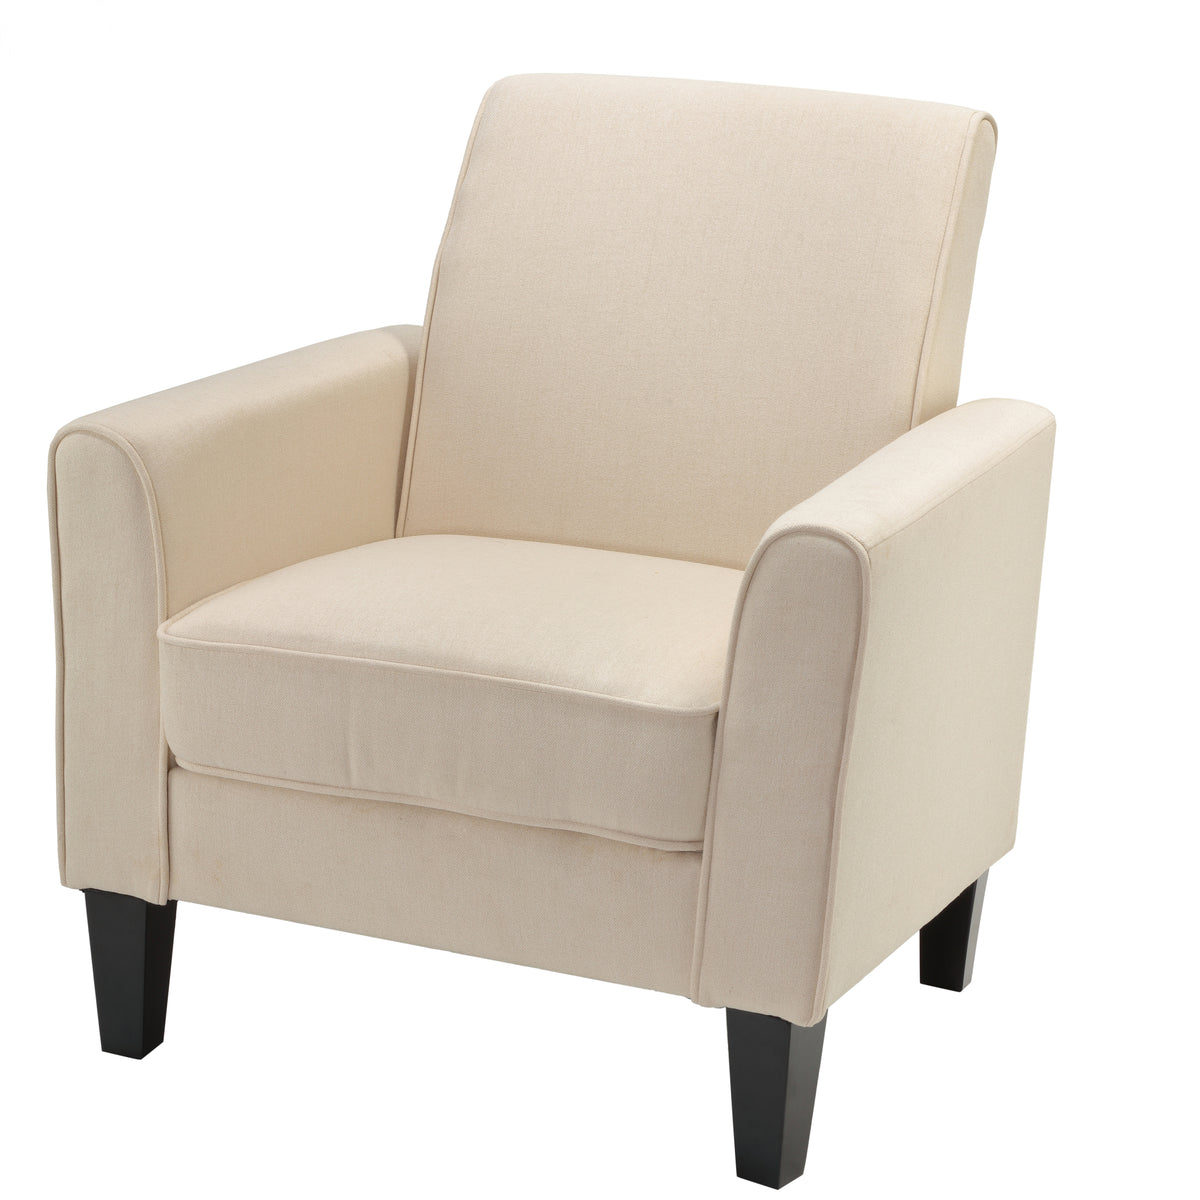 Cortesi Home Tali Arm Accent Chair, Solid Beige Linen Fabric